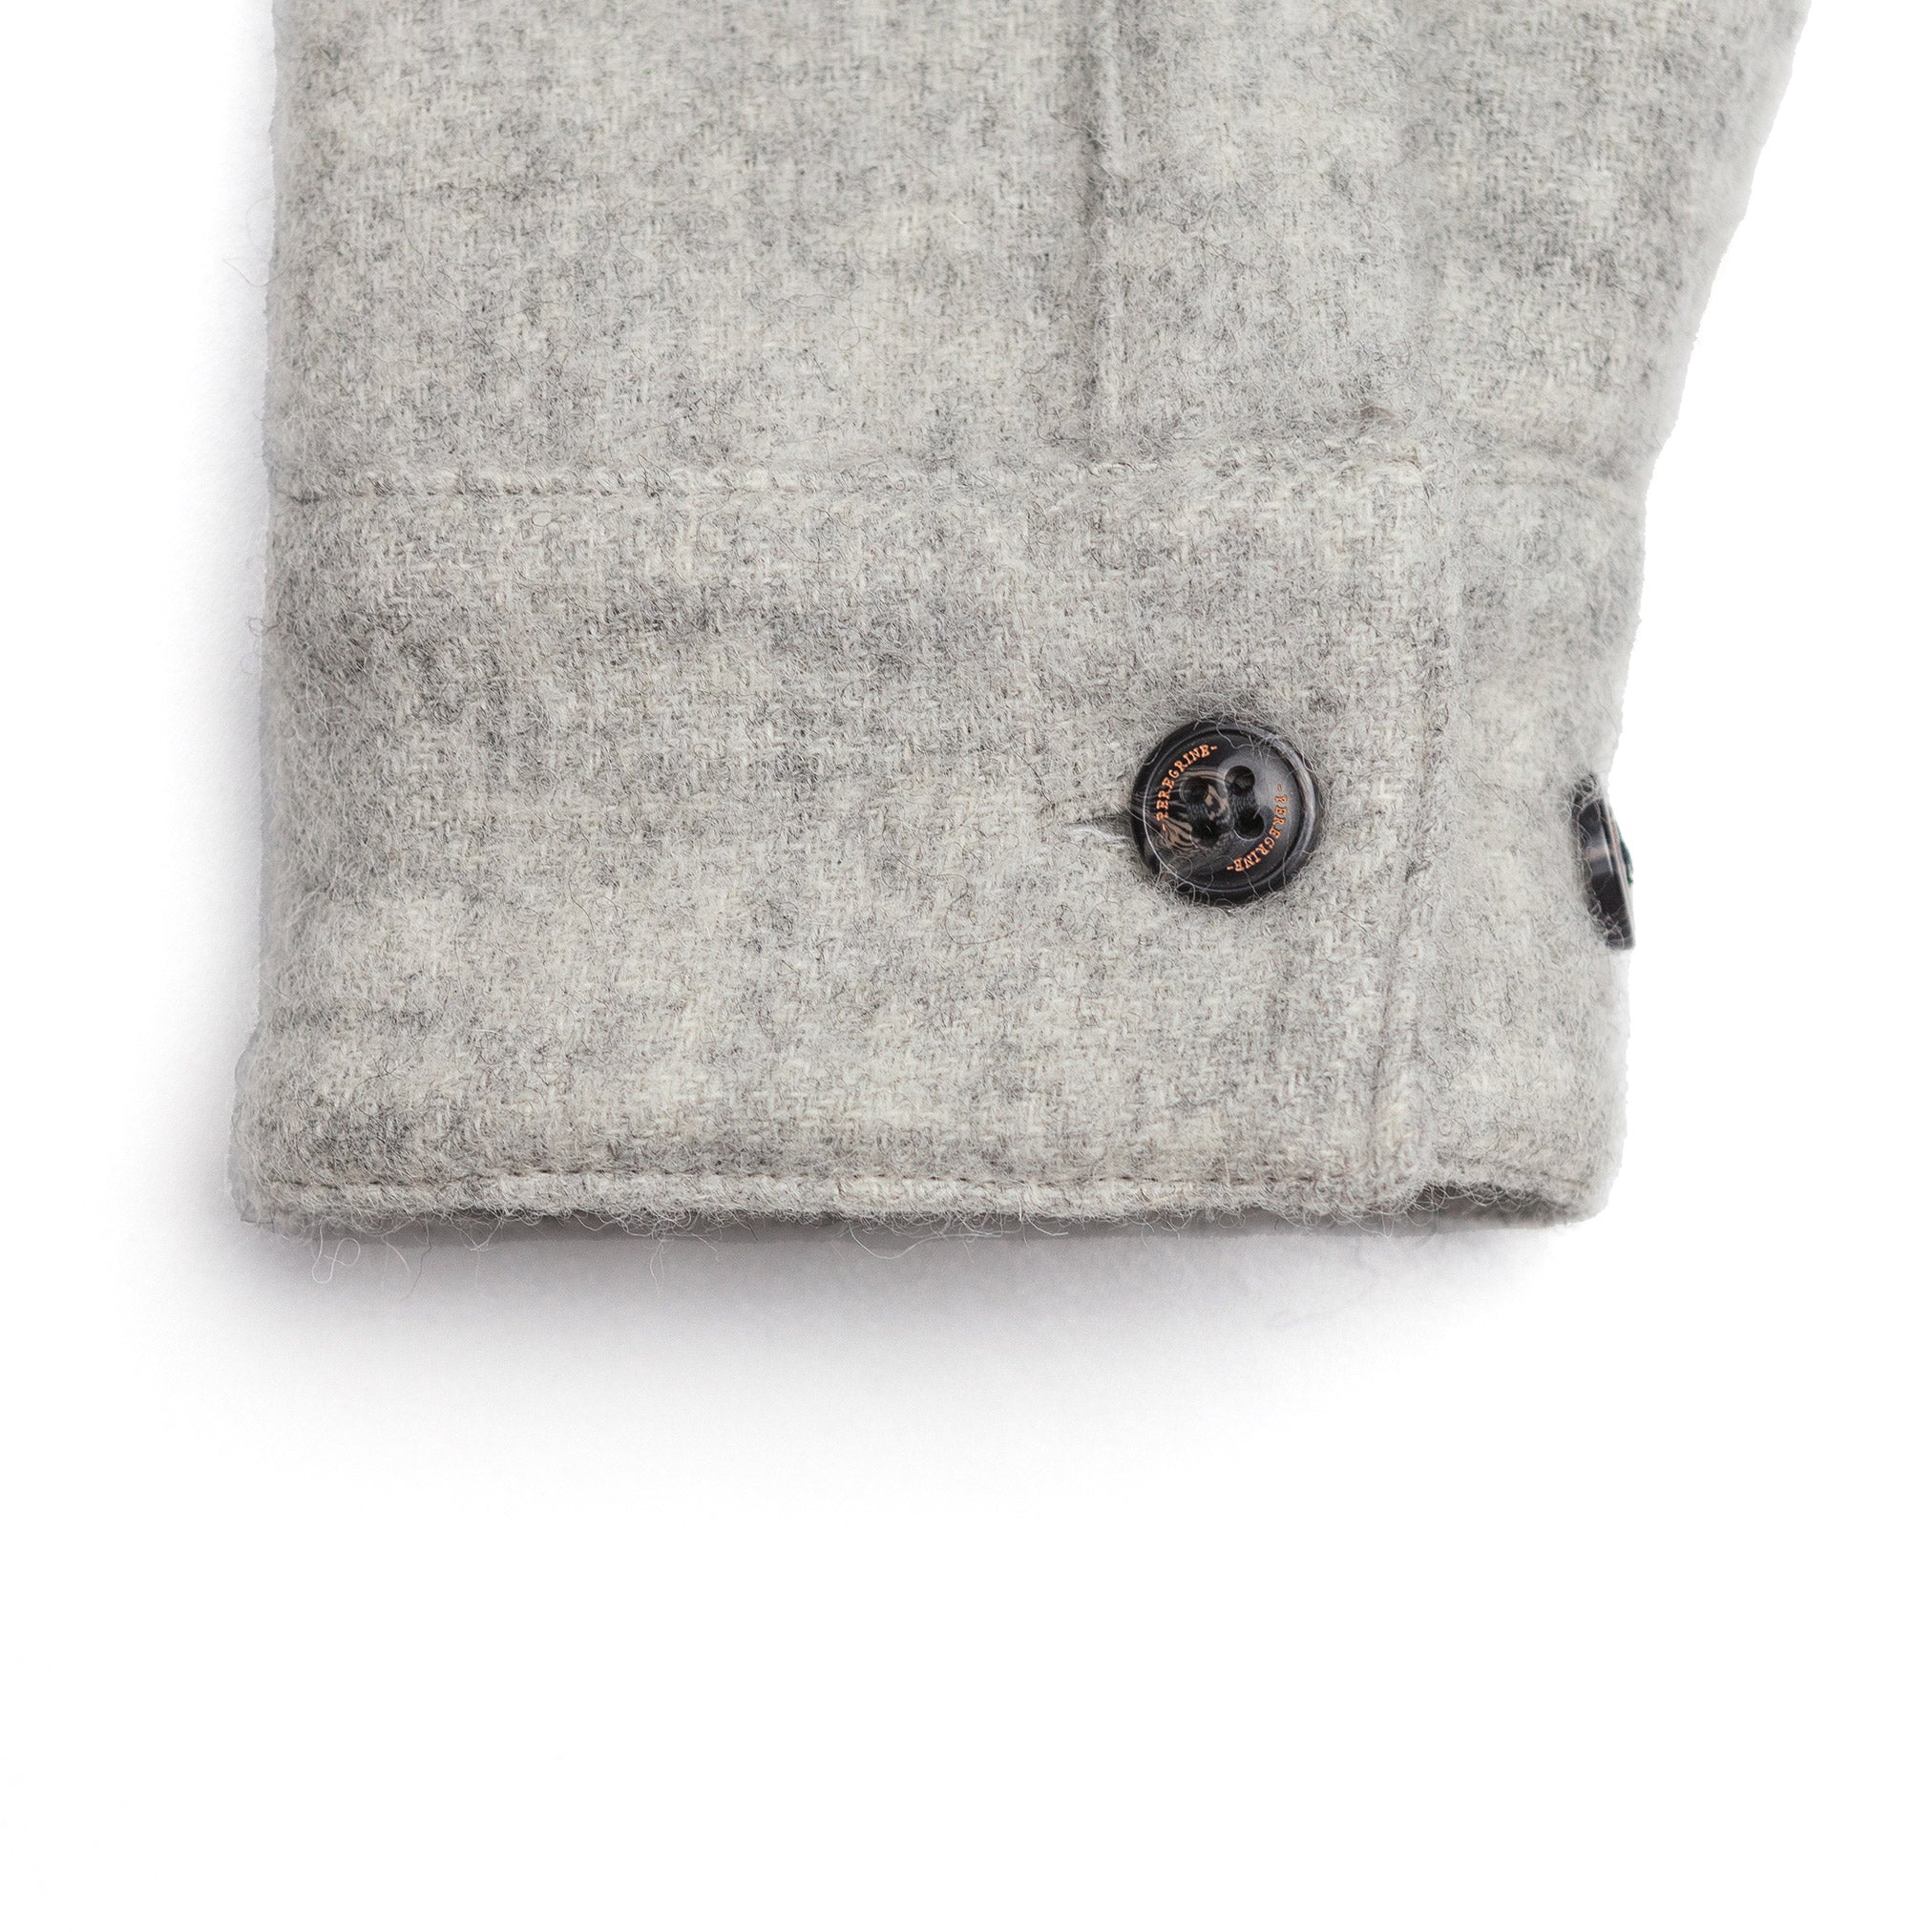 Over Shirt With Pocket Zip in Light Grey